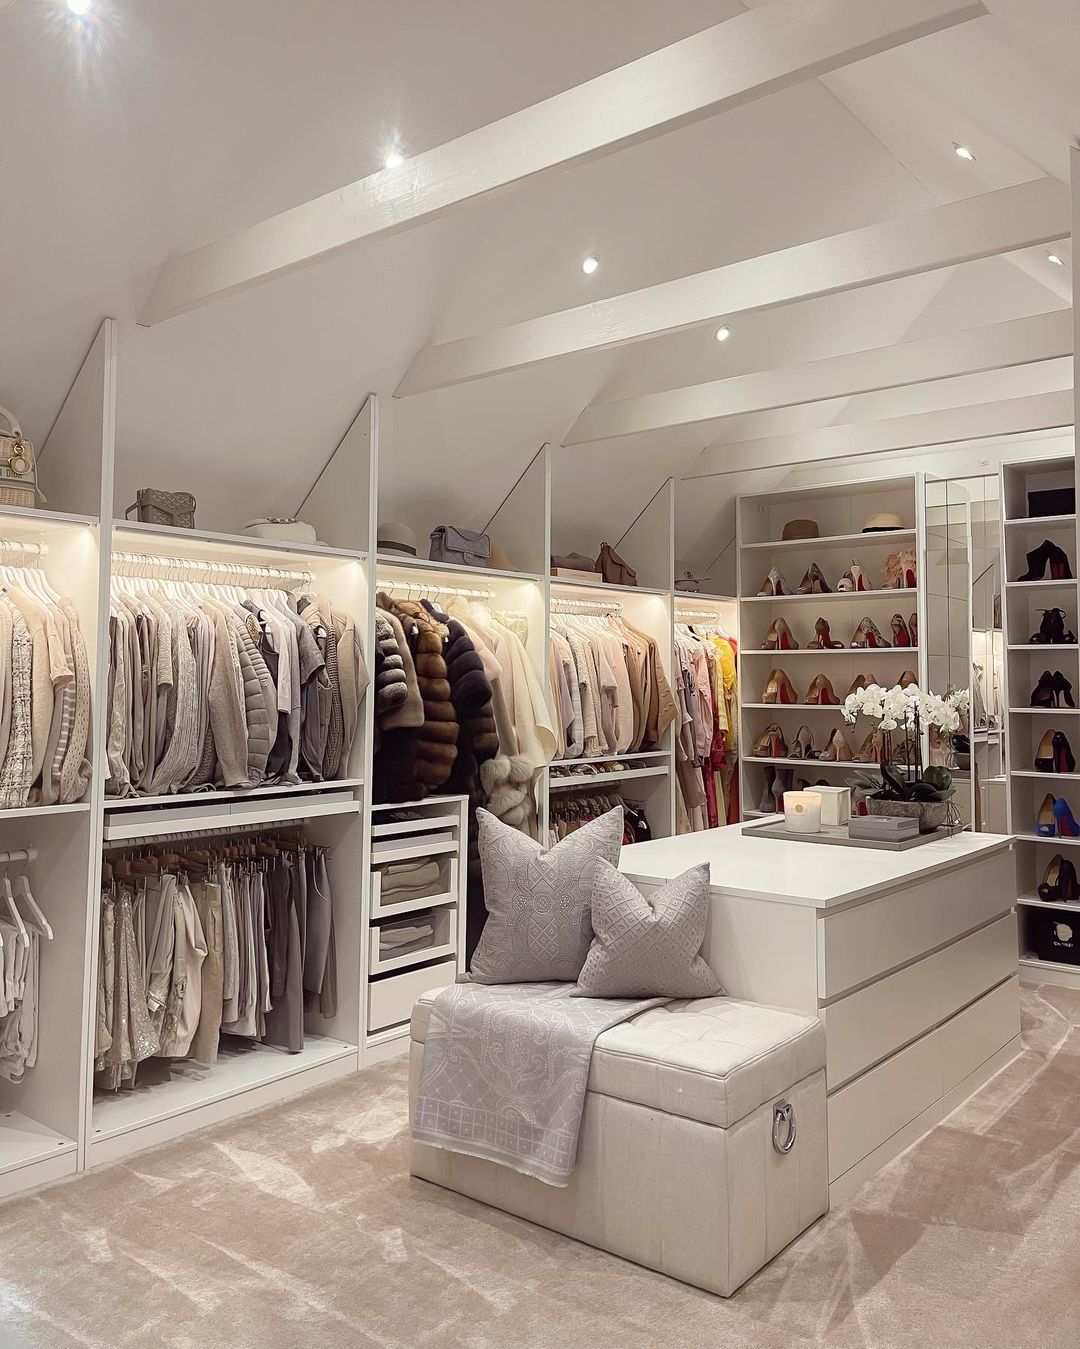 Closet Designs – What You Need to Know